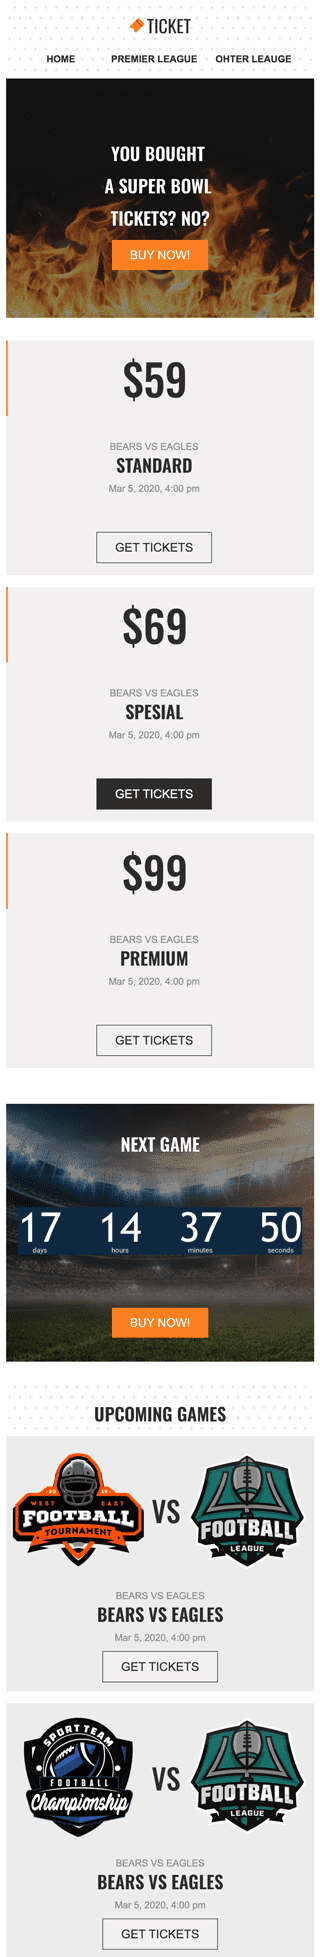 Super Bowl Email Template «Tickets» for Sports industry mobile view